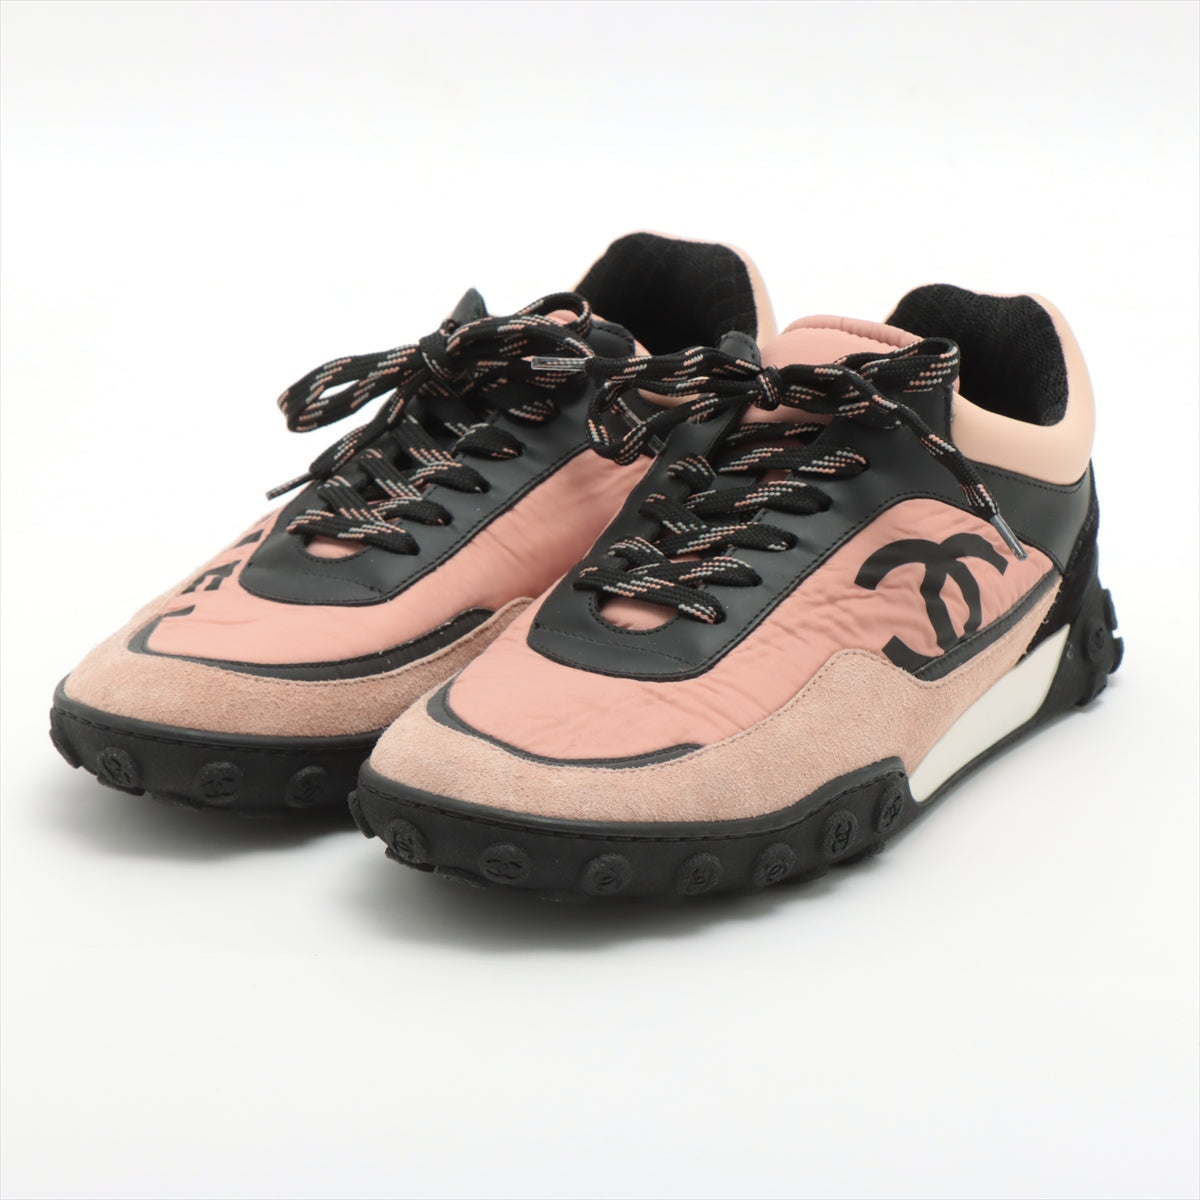 Chanel Coco Mark Suede x nylon Sneakers 38 1/2 Ladies' Black x pink G34086 There is a bag